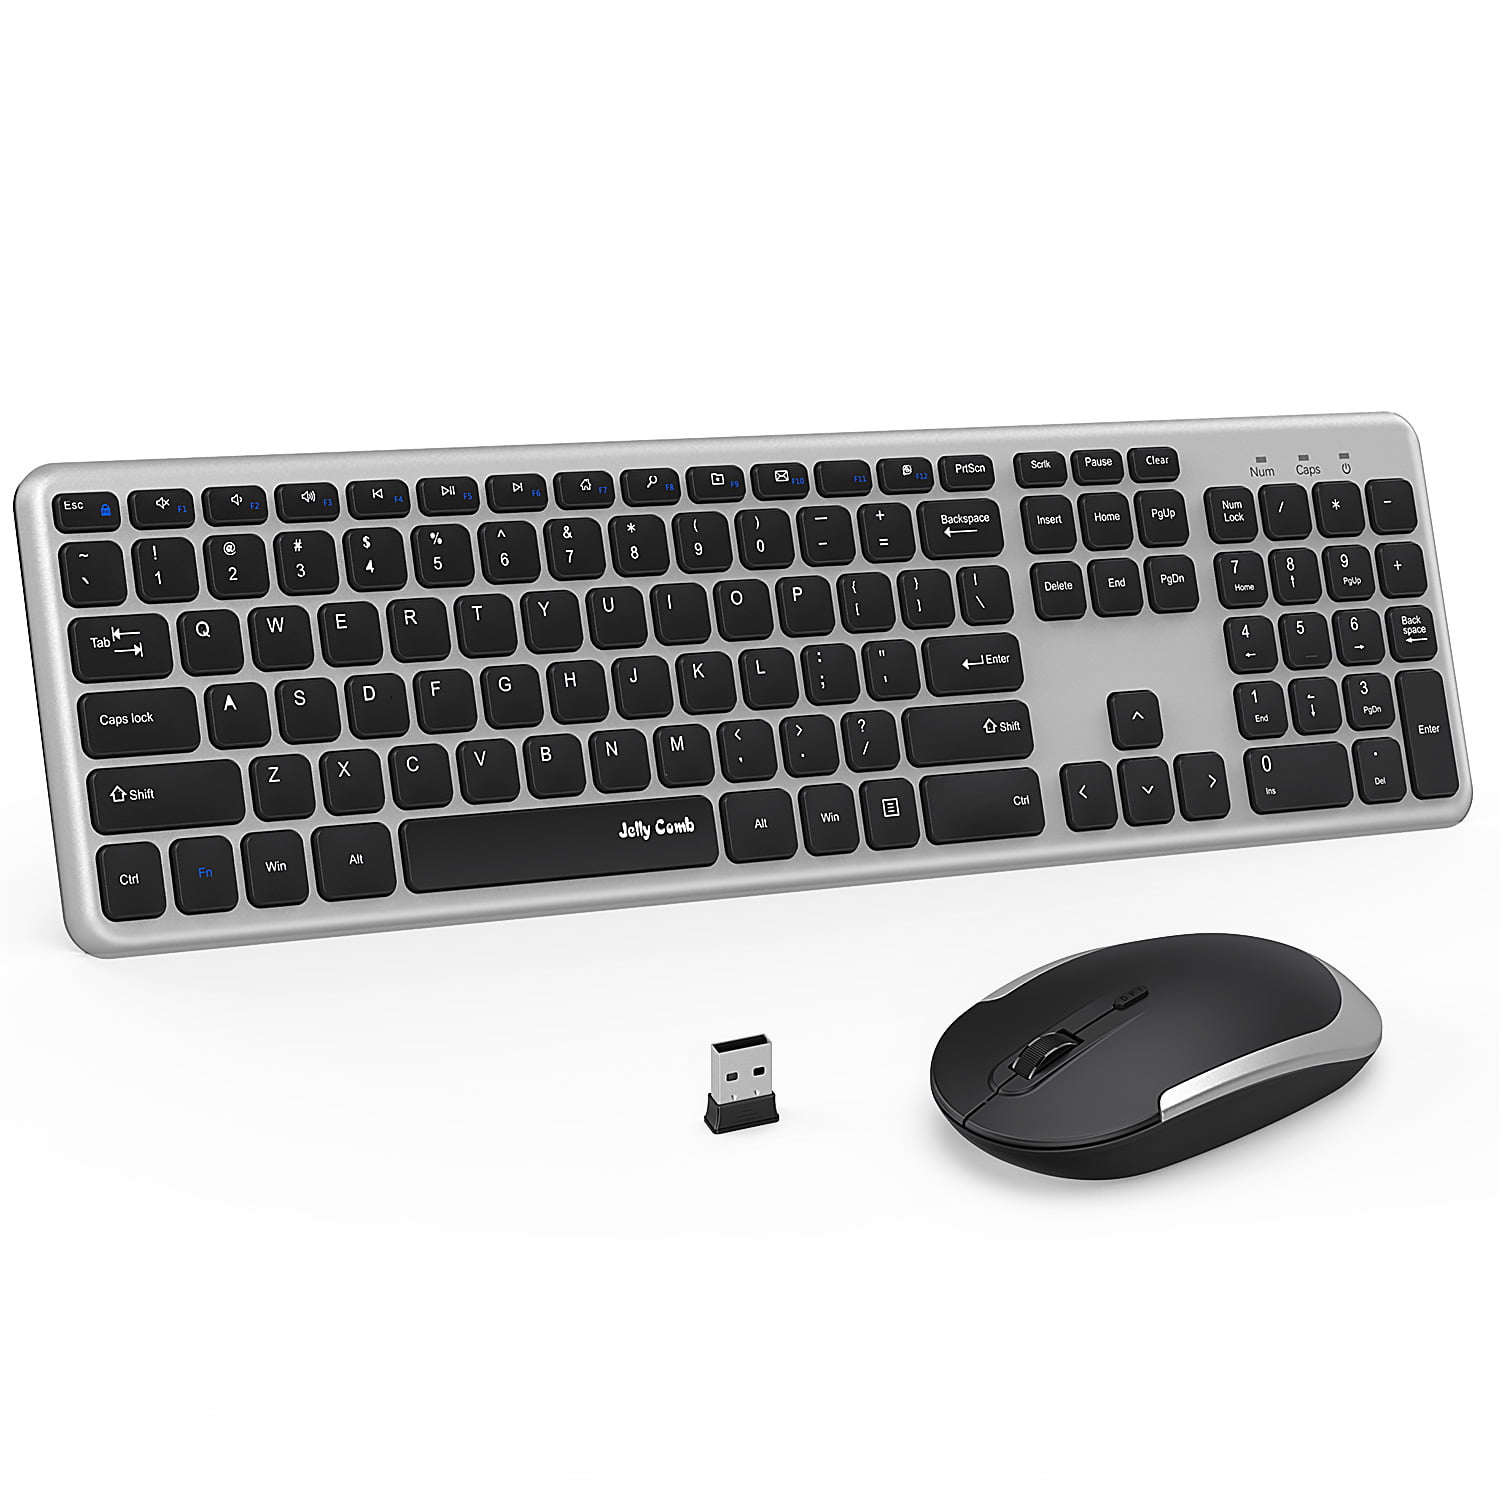 Ten years conversation Jabeth Wilson Wireless Keyboard and Mouse Combo with Nano USB Receiver, 2.4GHz Ultra Thin  Full Size Keyboard Mouse Set with Number Pad for Computer, Laptop, PC,  Desktop, Notebook, Windows 7, 8, 10 - Walmart.com